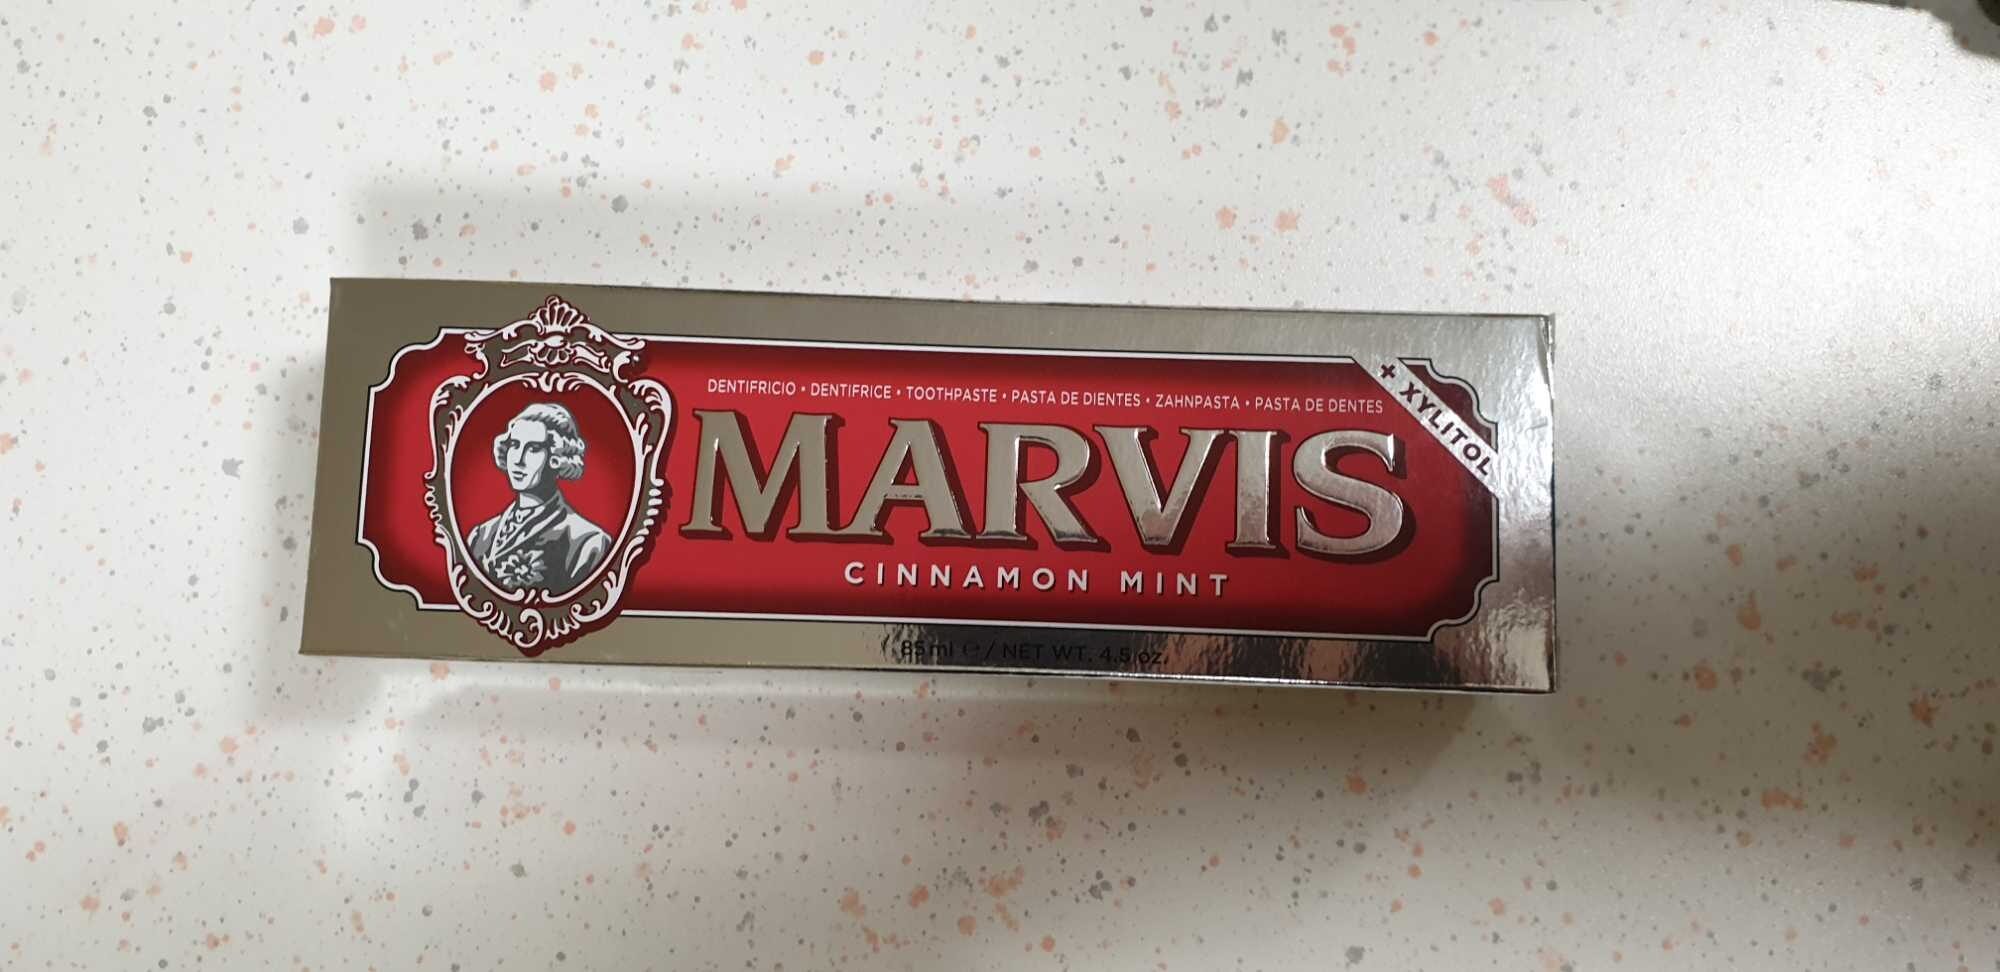 MARVIS WHITING TOOTHPASTE BEST TOOTHPASTE BRANDS IN THE WORLD 